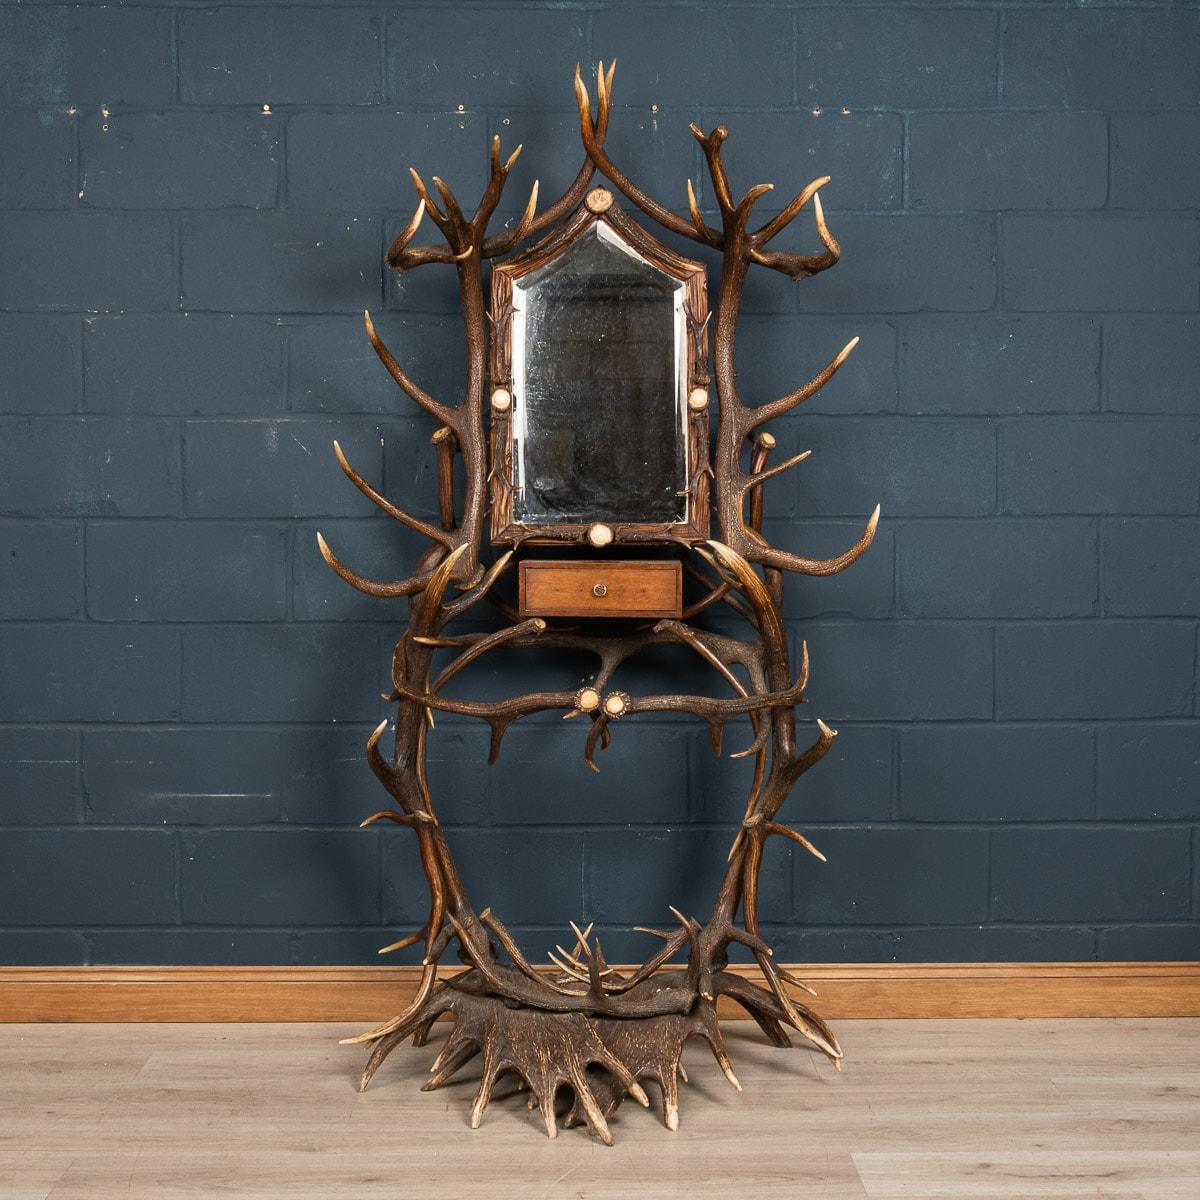 This particular hall stand dates back to the latter part of the 19th century. It has incredible detail, with carved antler horns, as well as using antlers not just for the structure of the hall stand but for detailed decorative elements throughout.